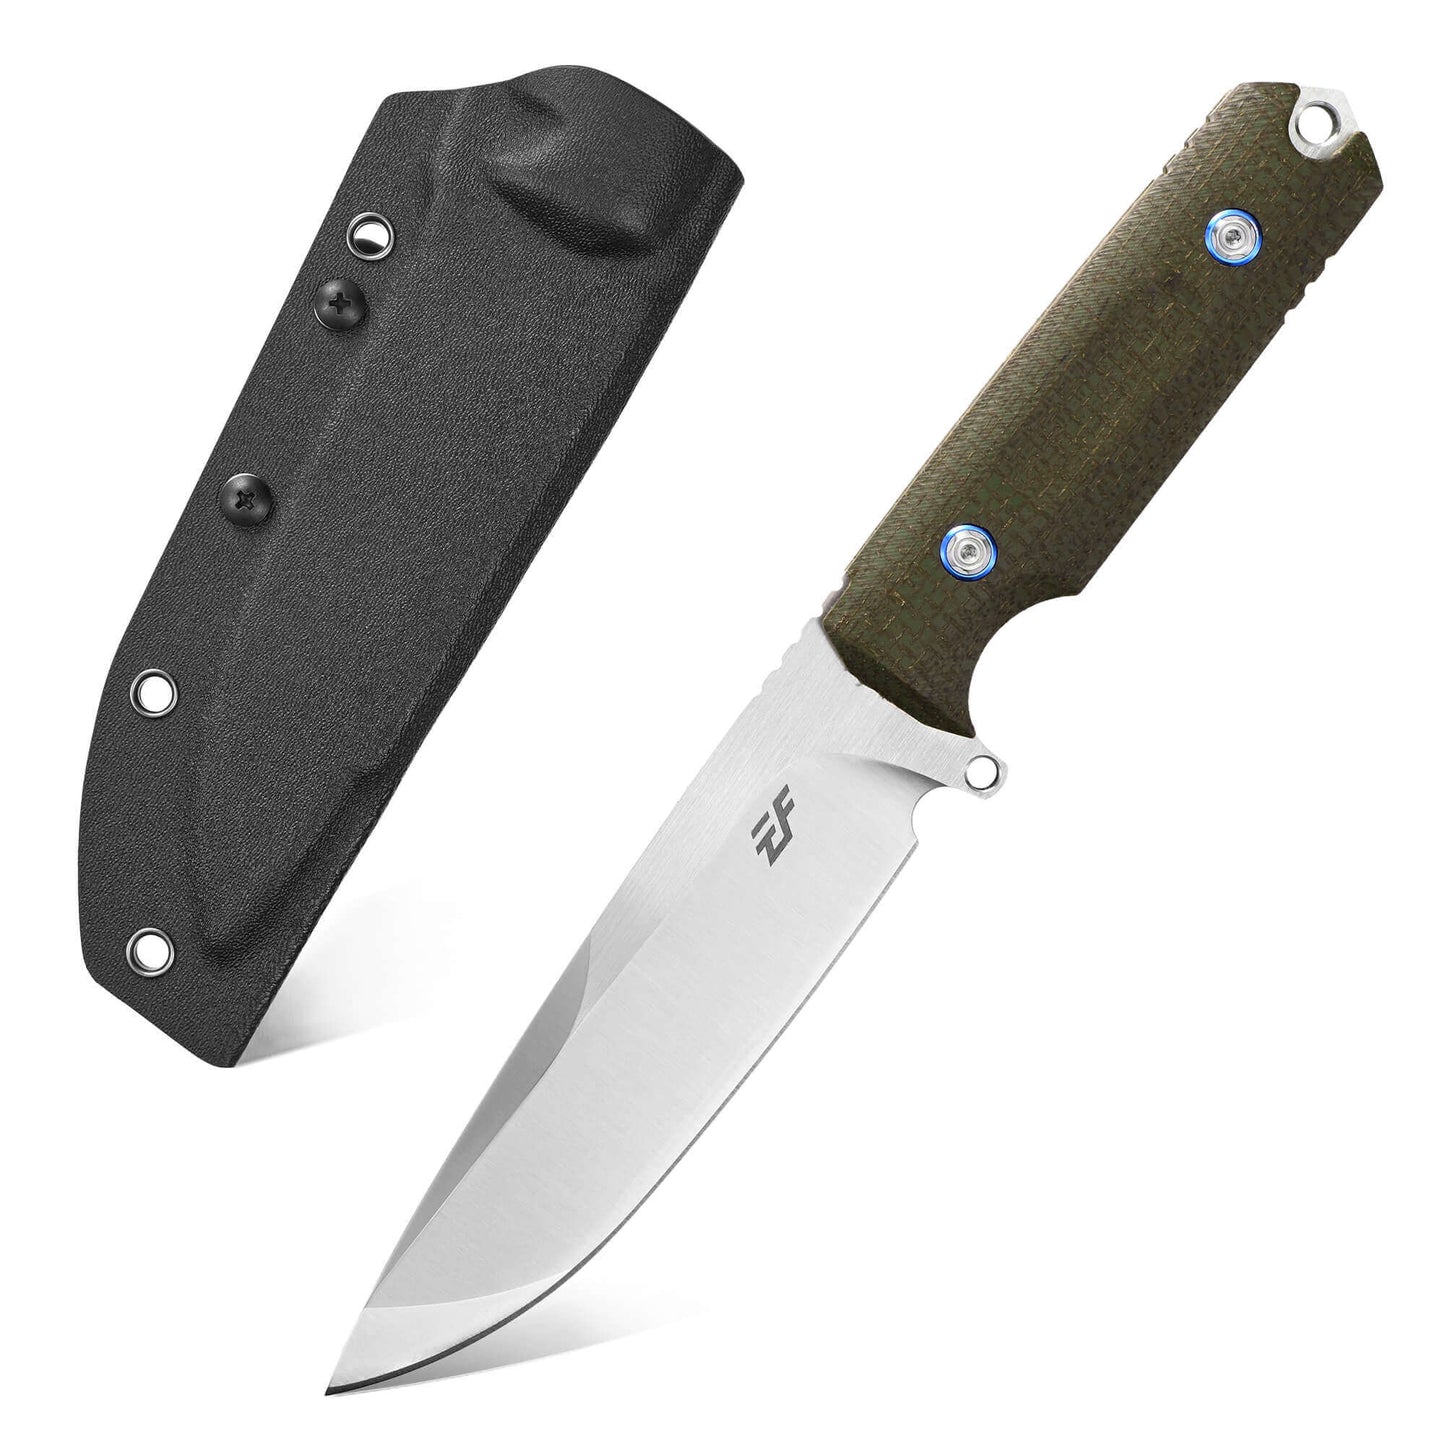 Eafengrow EF131 Fixed Blade Knife For Camping Hunting